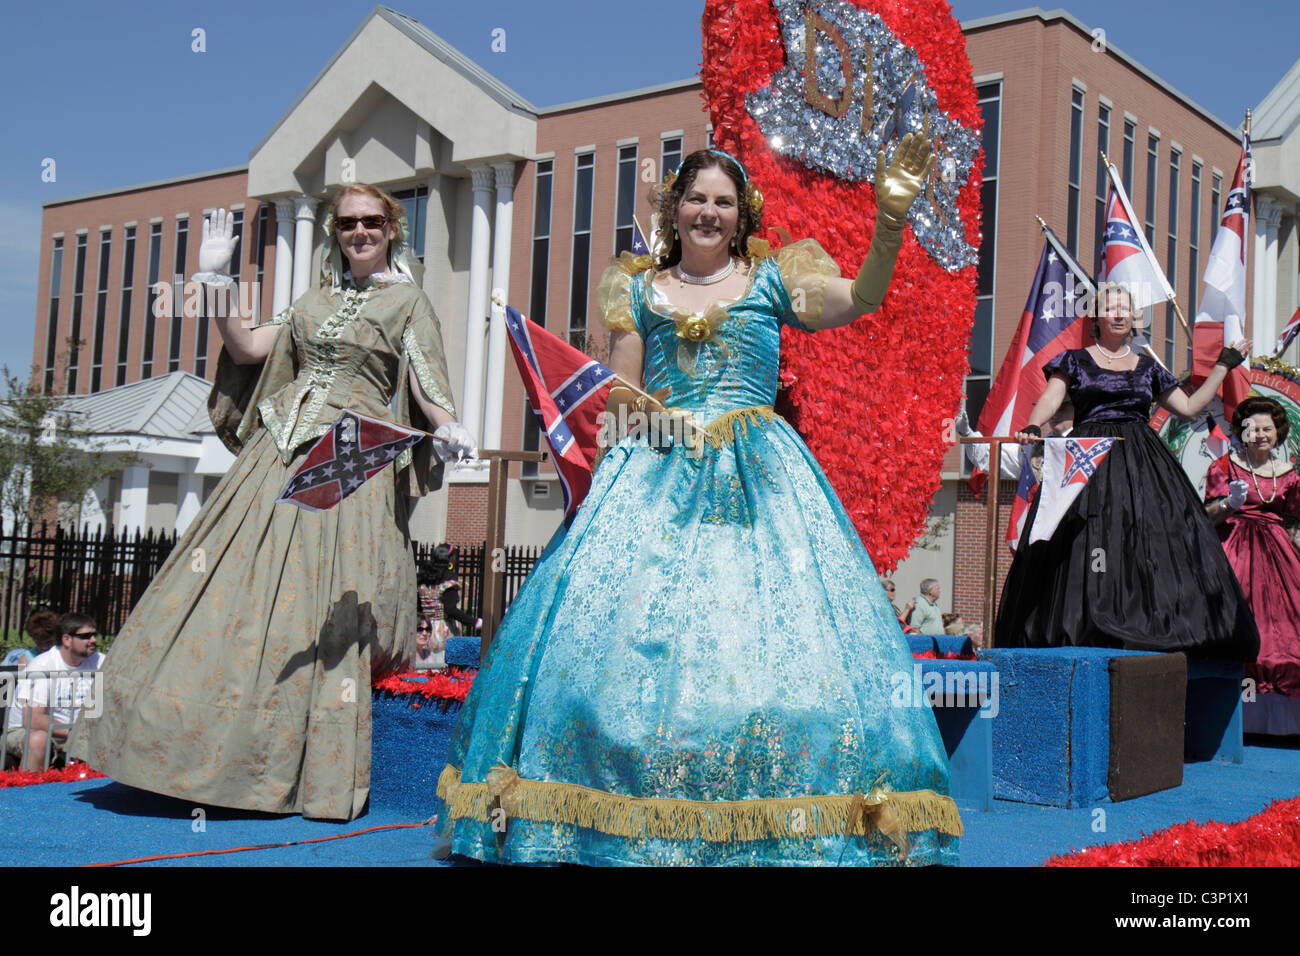 Florida,Hillsborough County,Plant City,West Reynolds Street,Florida Strawberry Festival,Grand Parade,Daughters of the Confederacy,controversial tradit Stock Photo